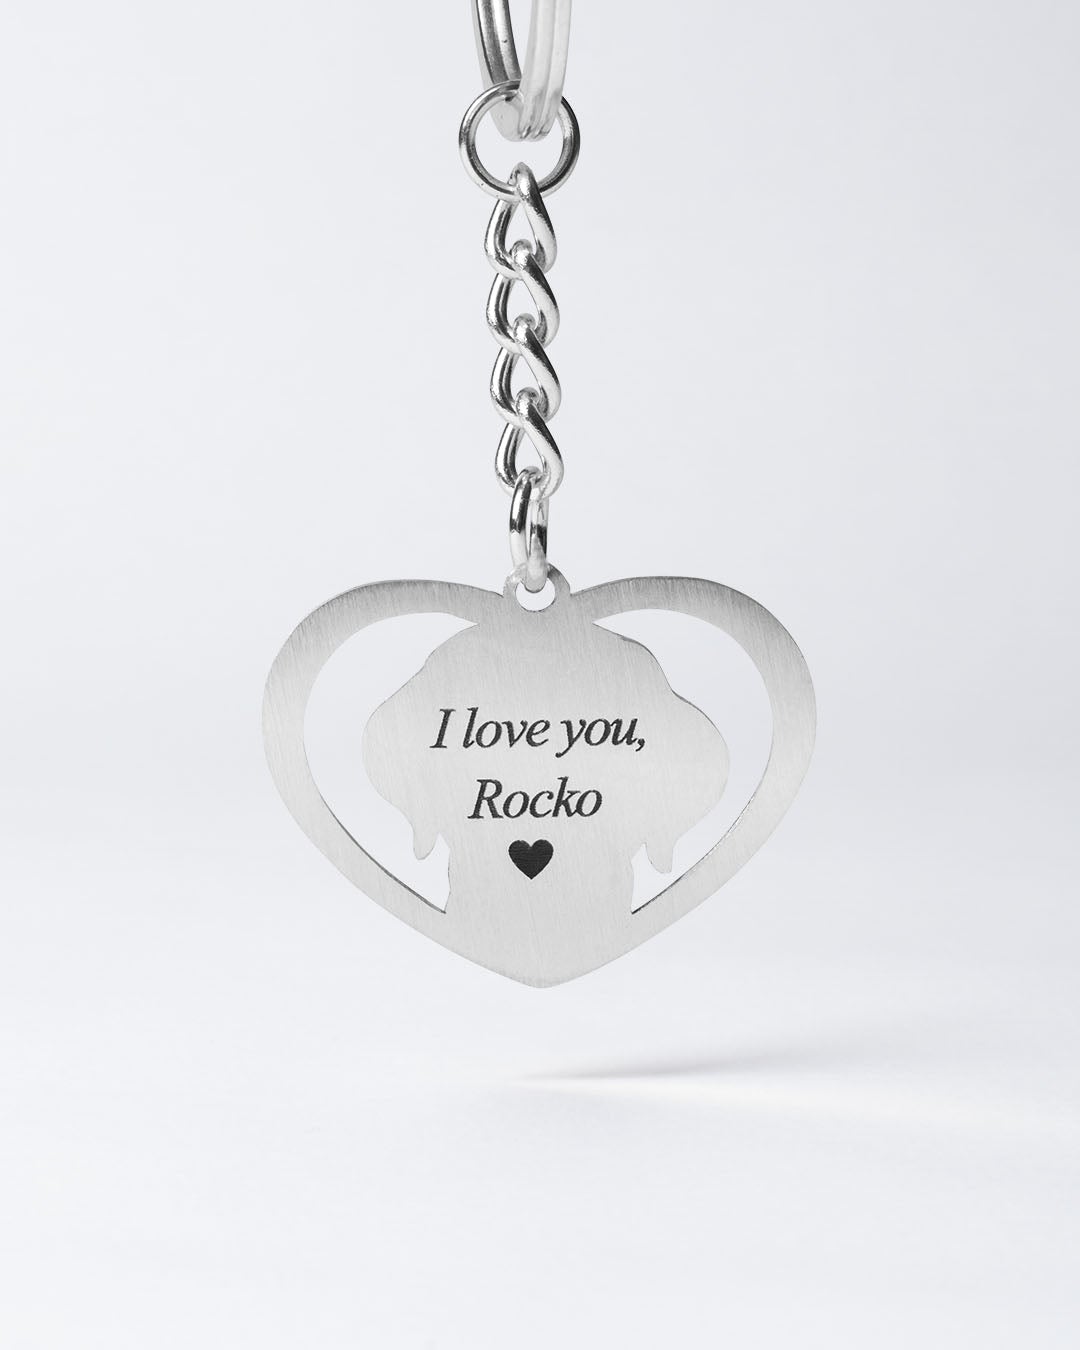 Dog memorial gift, Halo Heart Keychain Engraving